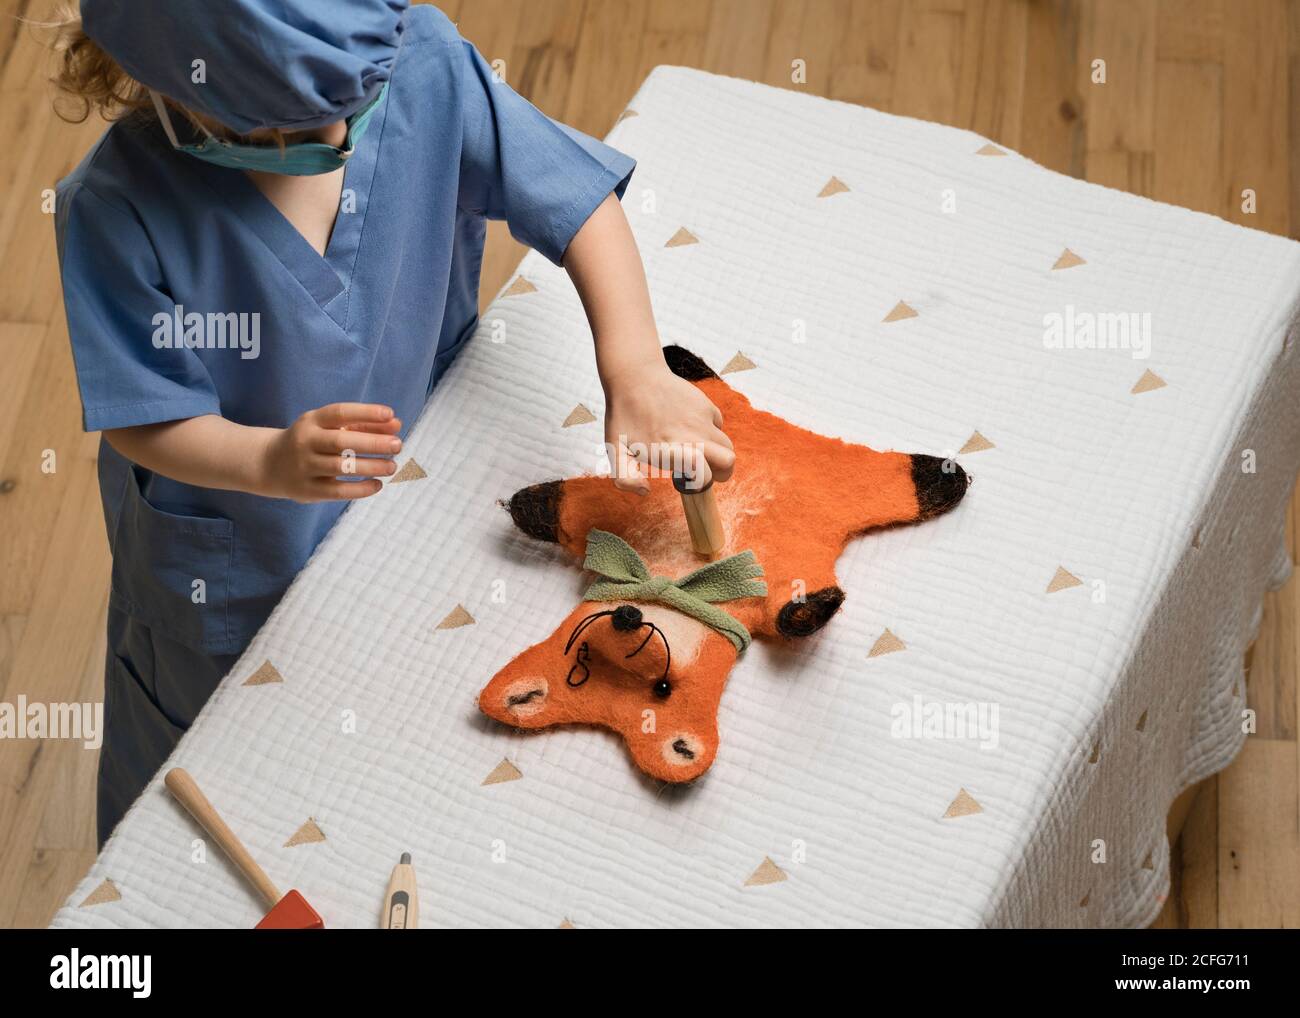 young child wearing medical PPE administers a shot to a plush toy fox hand puppet Stock Photo